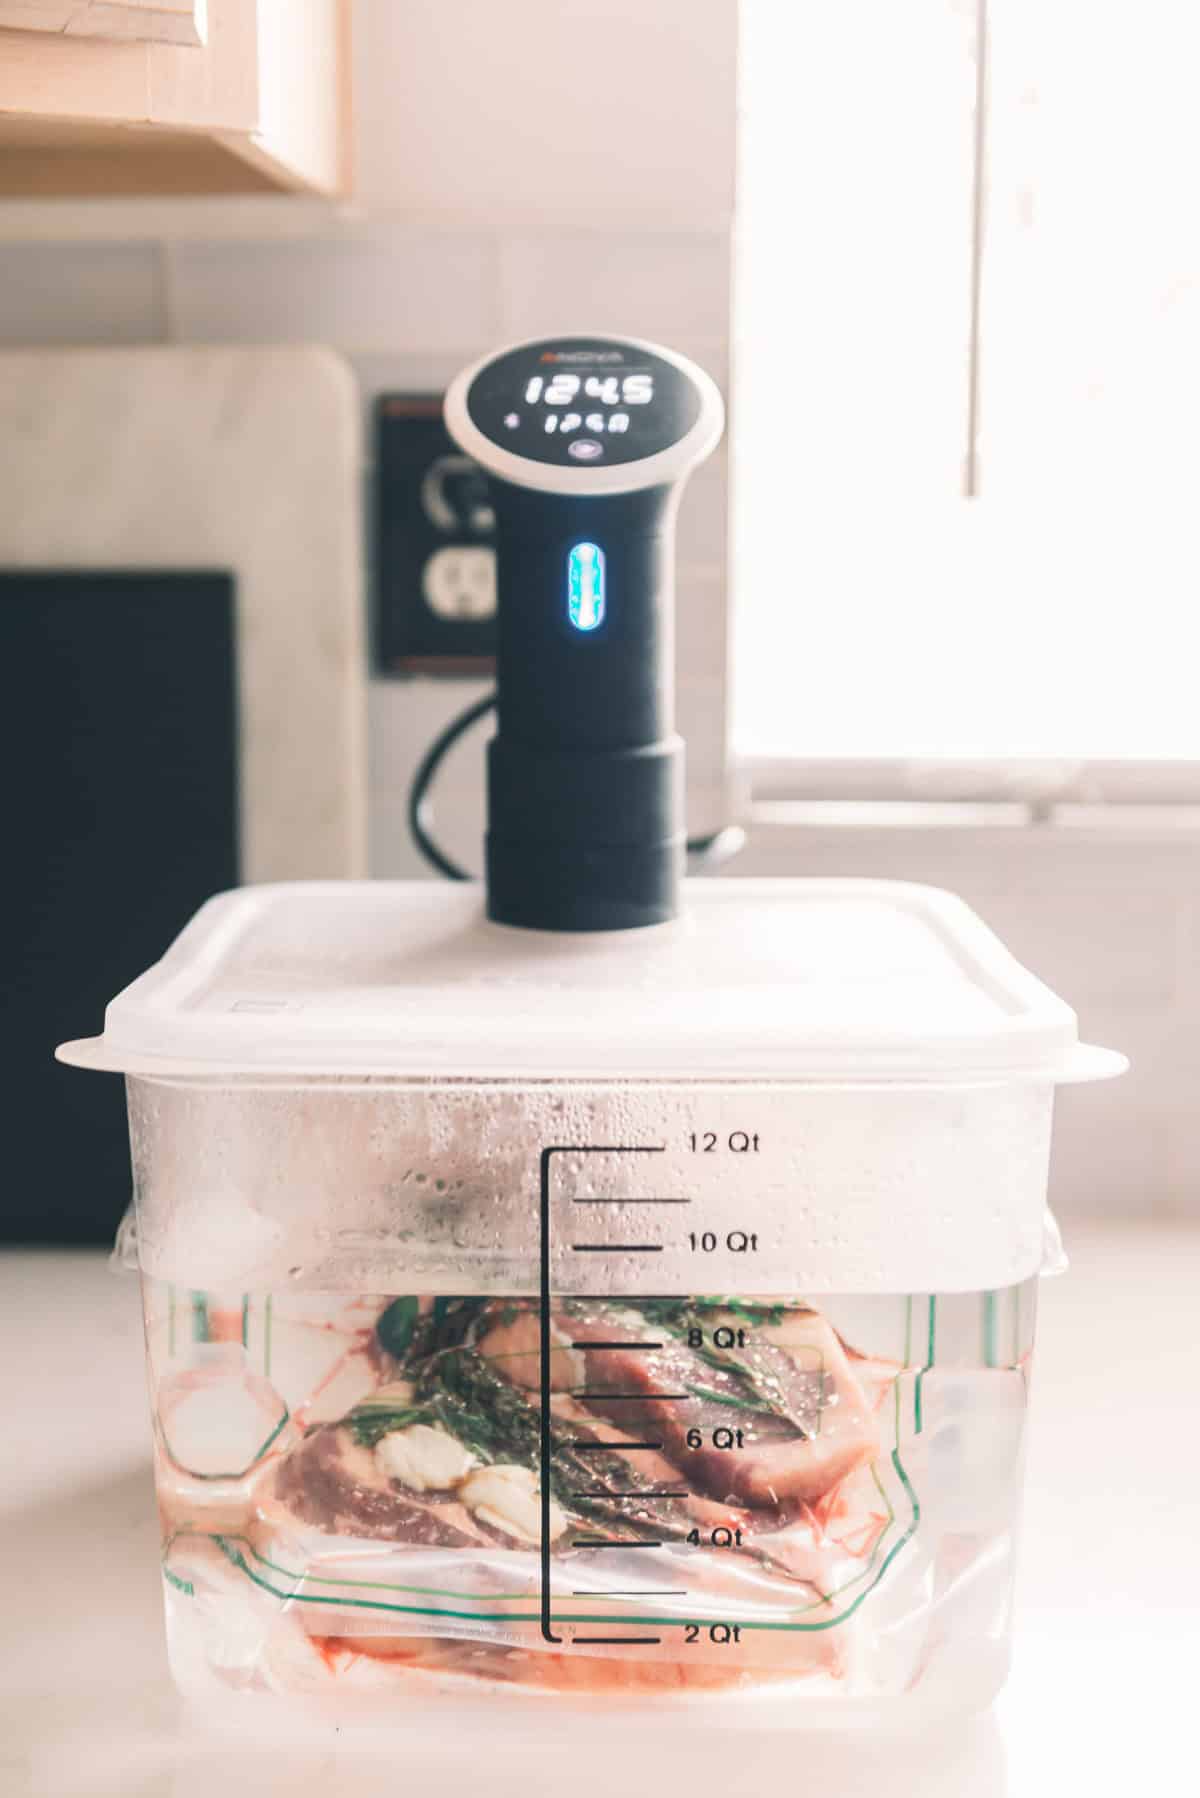 A sous vide cooker attached to a clear container filled with water and various foods, displaying a temperature of 124.5 degrees Fahrenheit.